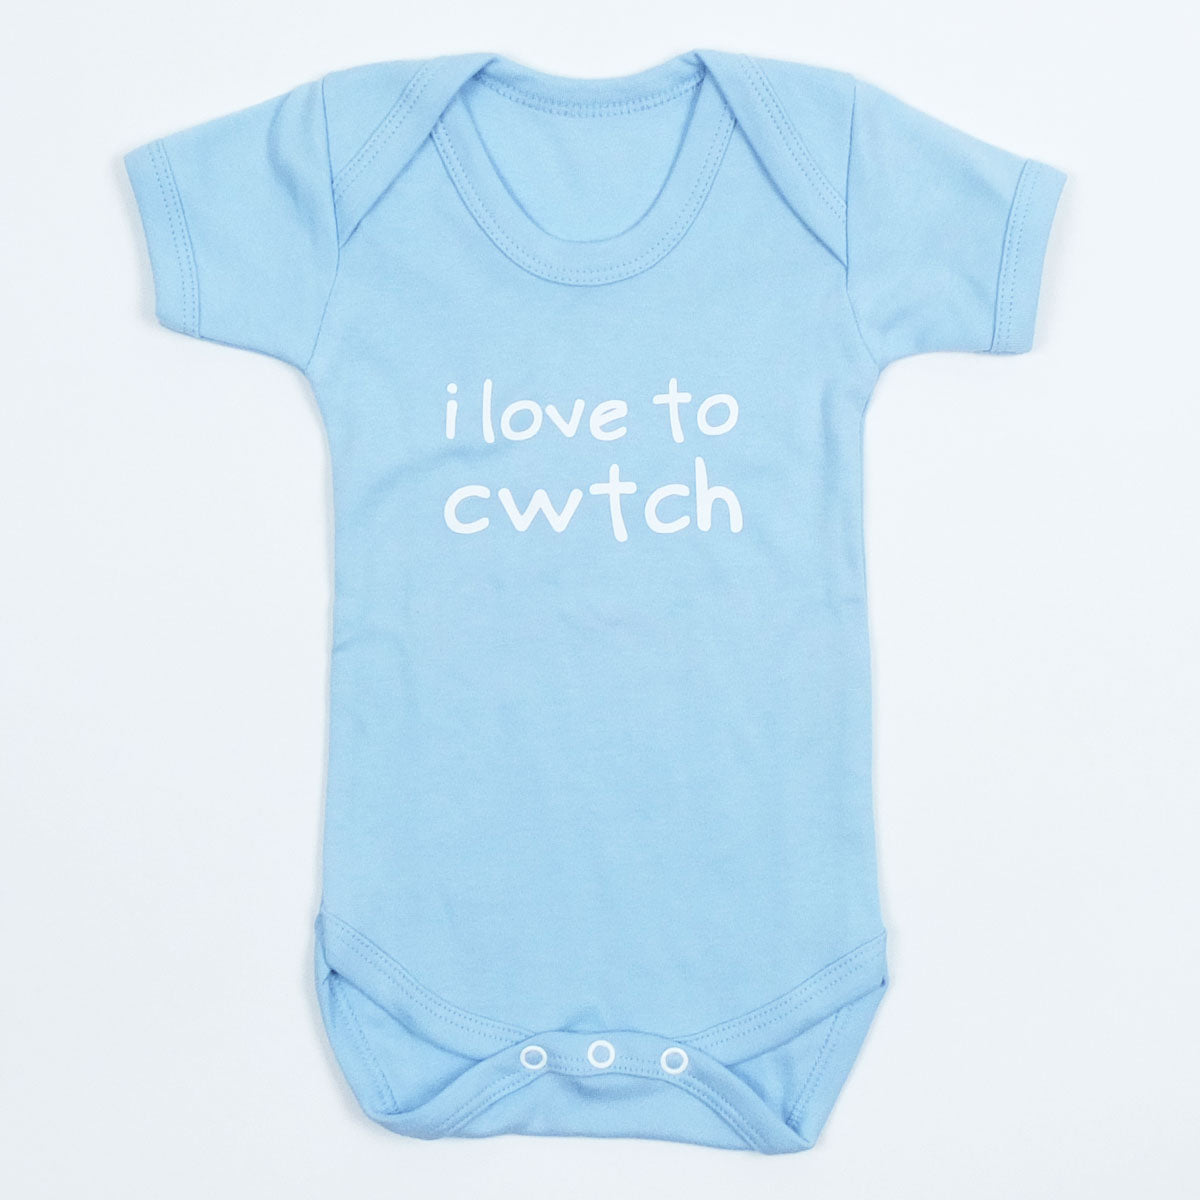 I Love to Cwtch Baby Vest in Pale Blue